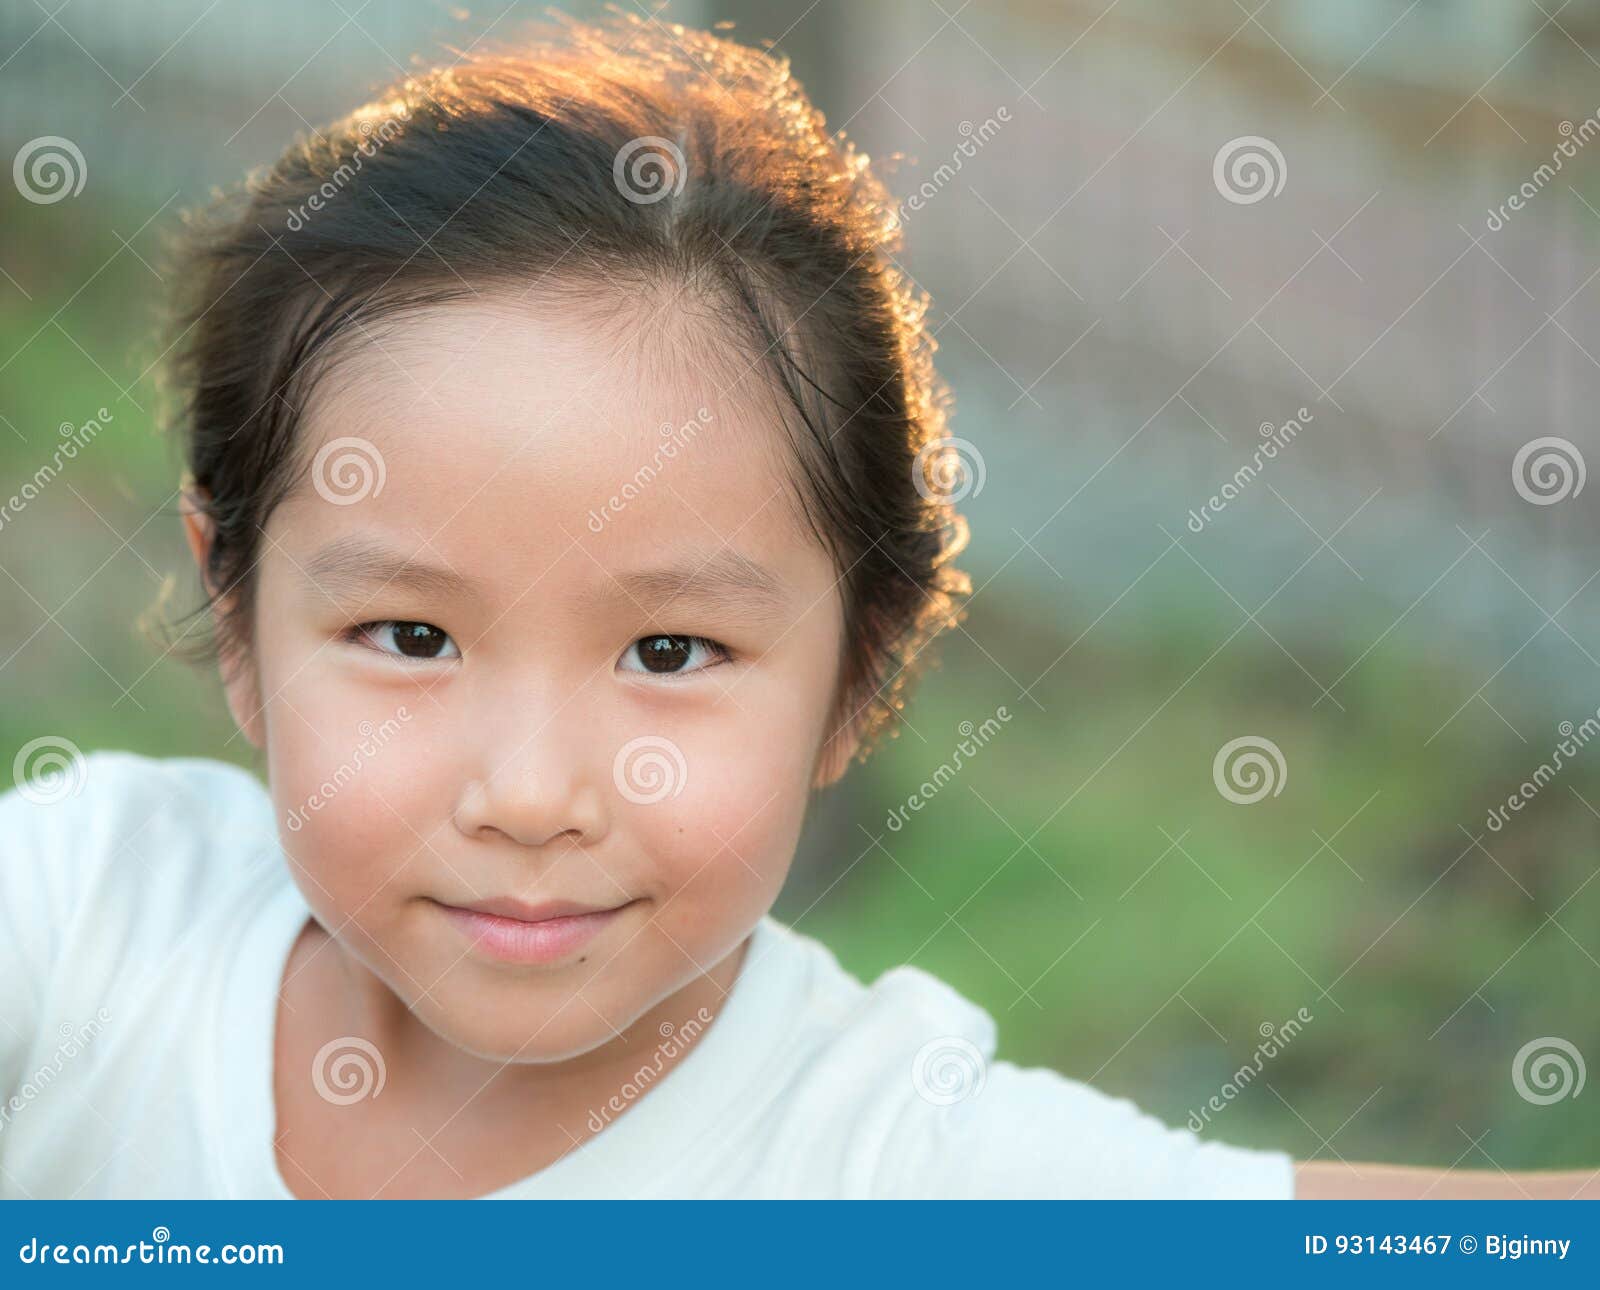 Adorable Asian Cute Girl Close Up Head Shot Stock Image - Image of ...